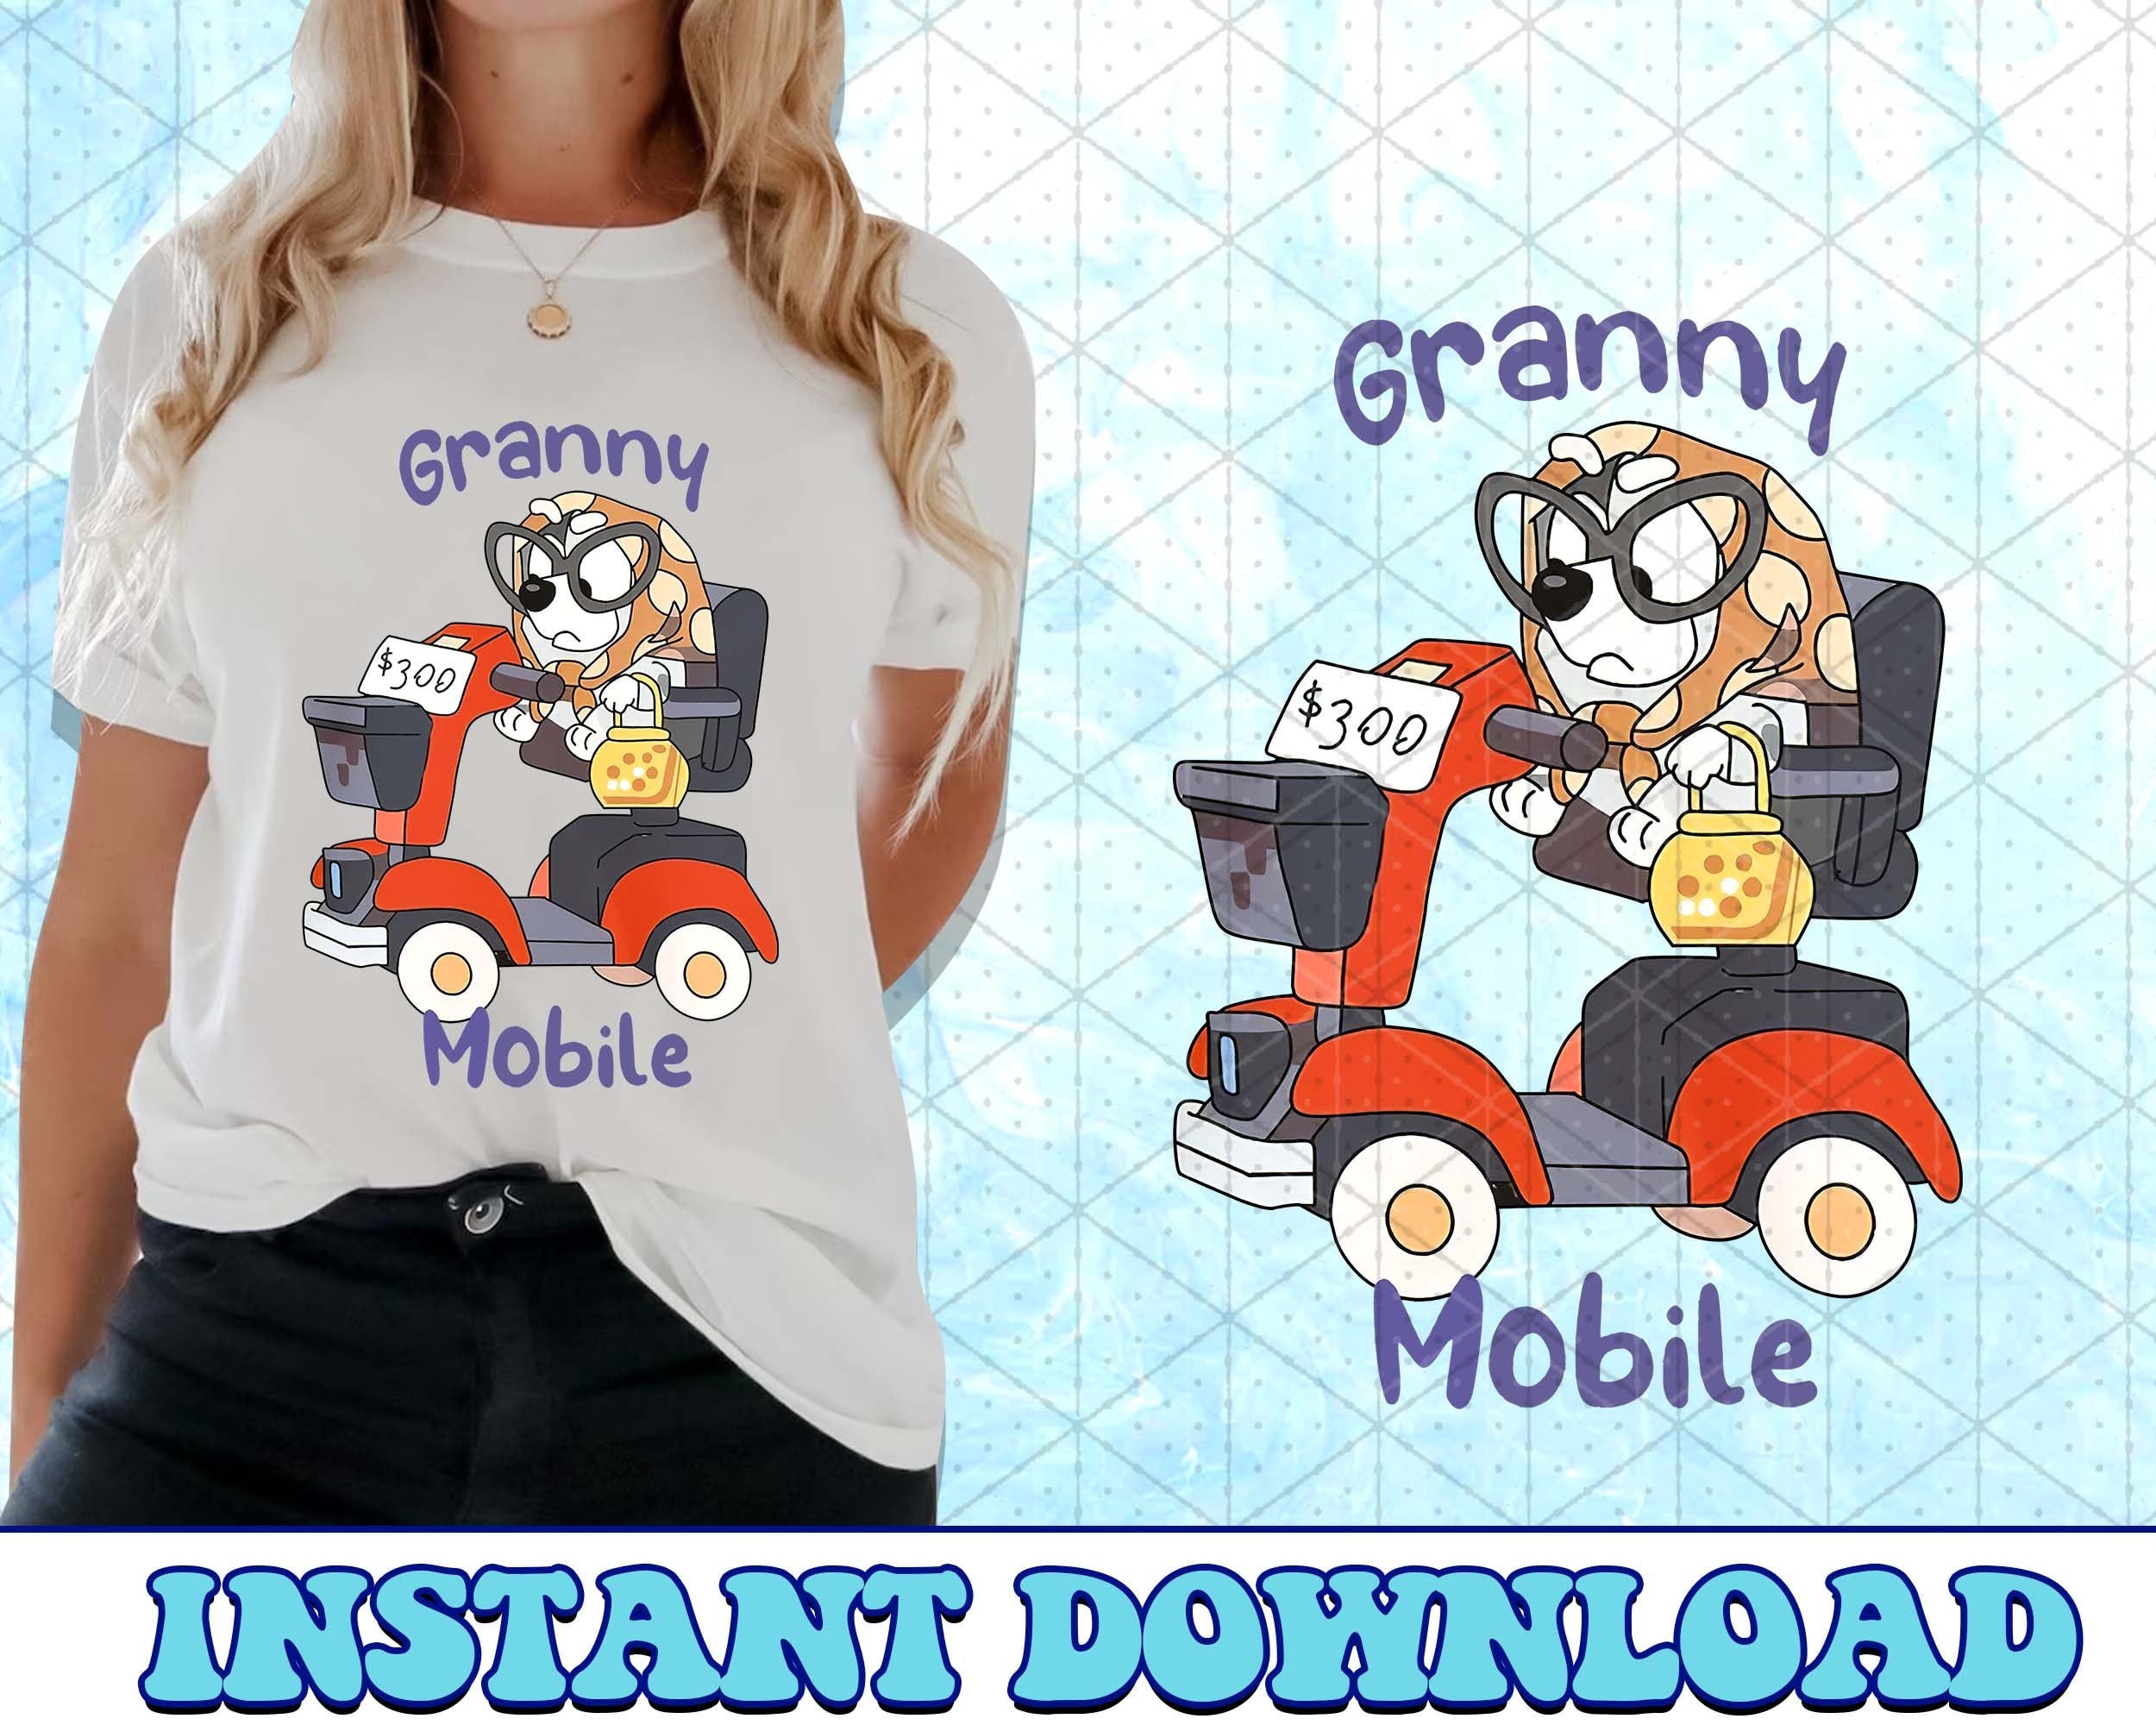 Granny Mobile Bluey PNG, Bluey Family PNG, Bluey Png, Bluey Bingo Png, Bluey Mom Png, Bluey Dad Png, Bluey Friends Png, Bluey PNG